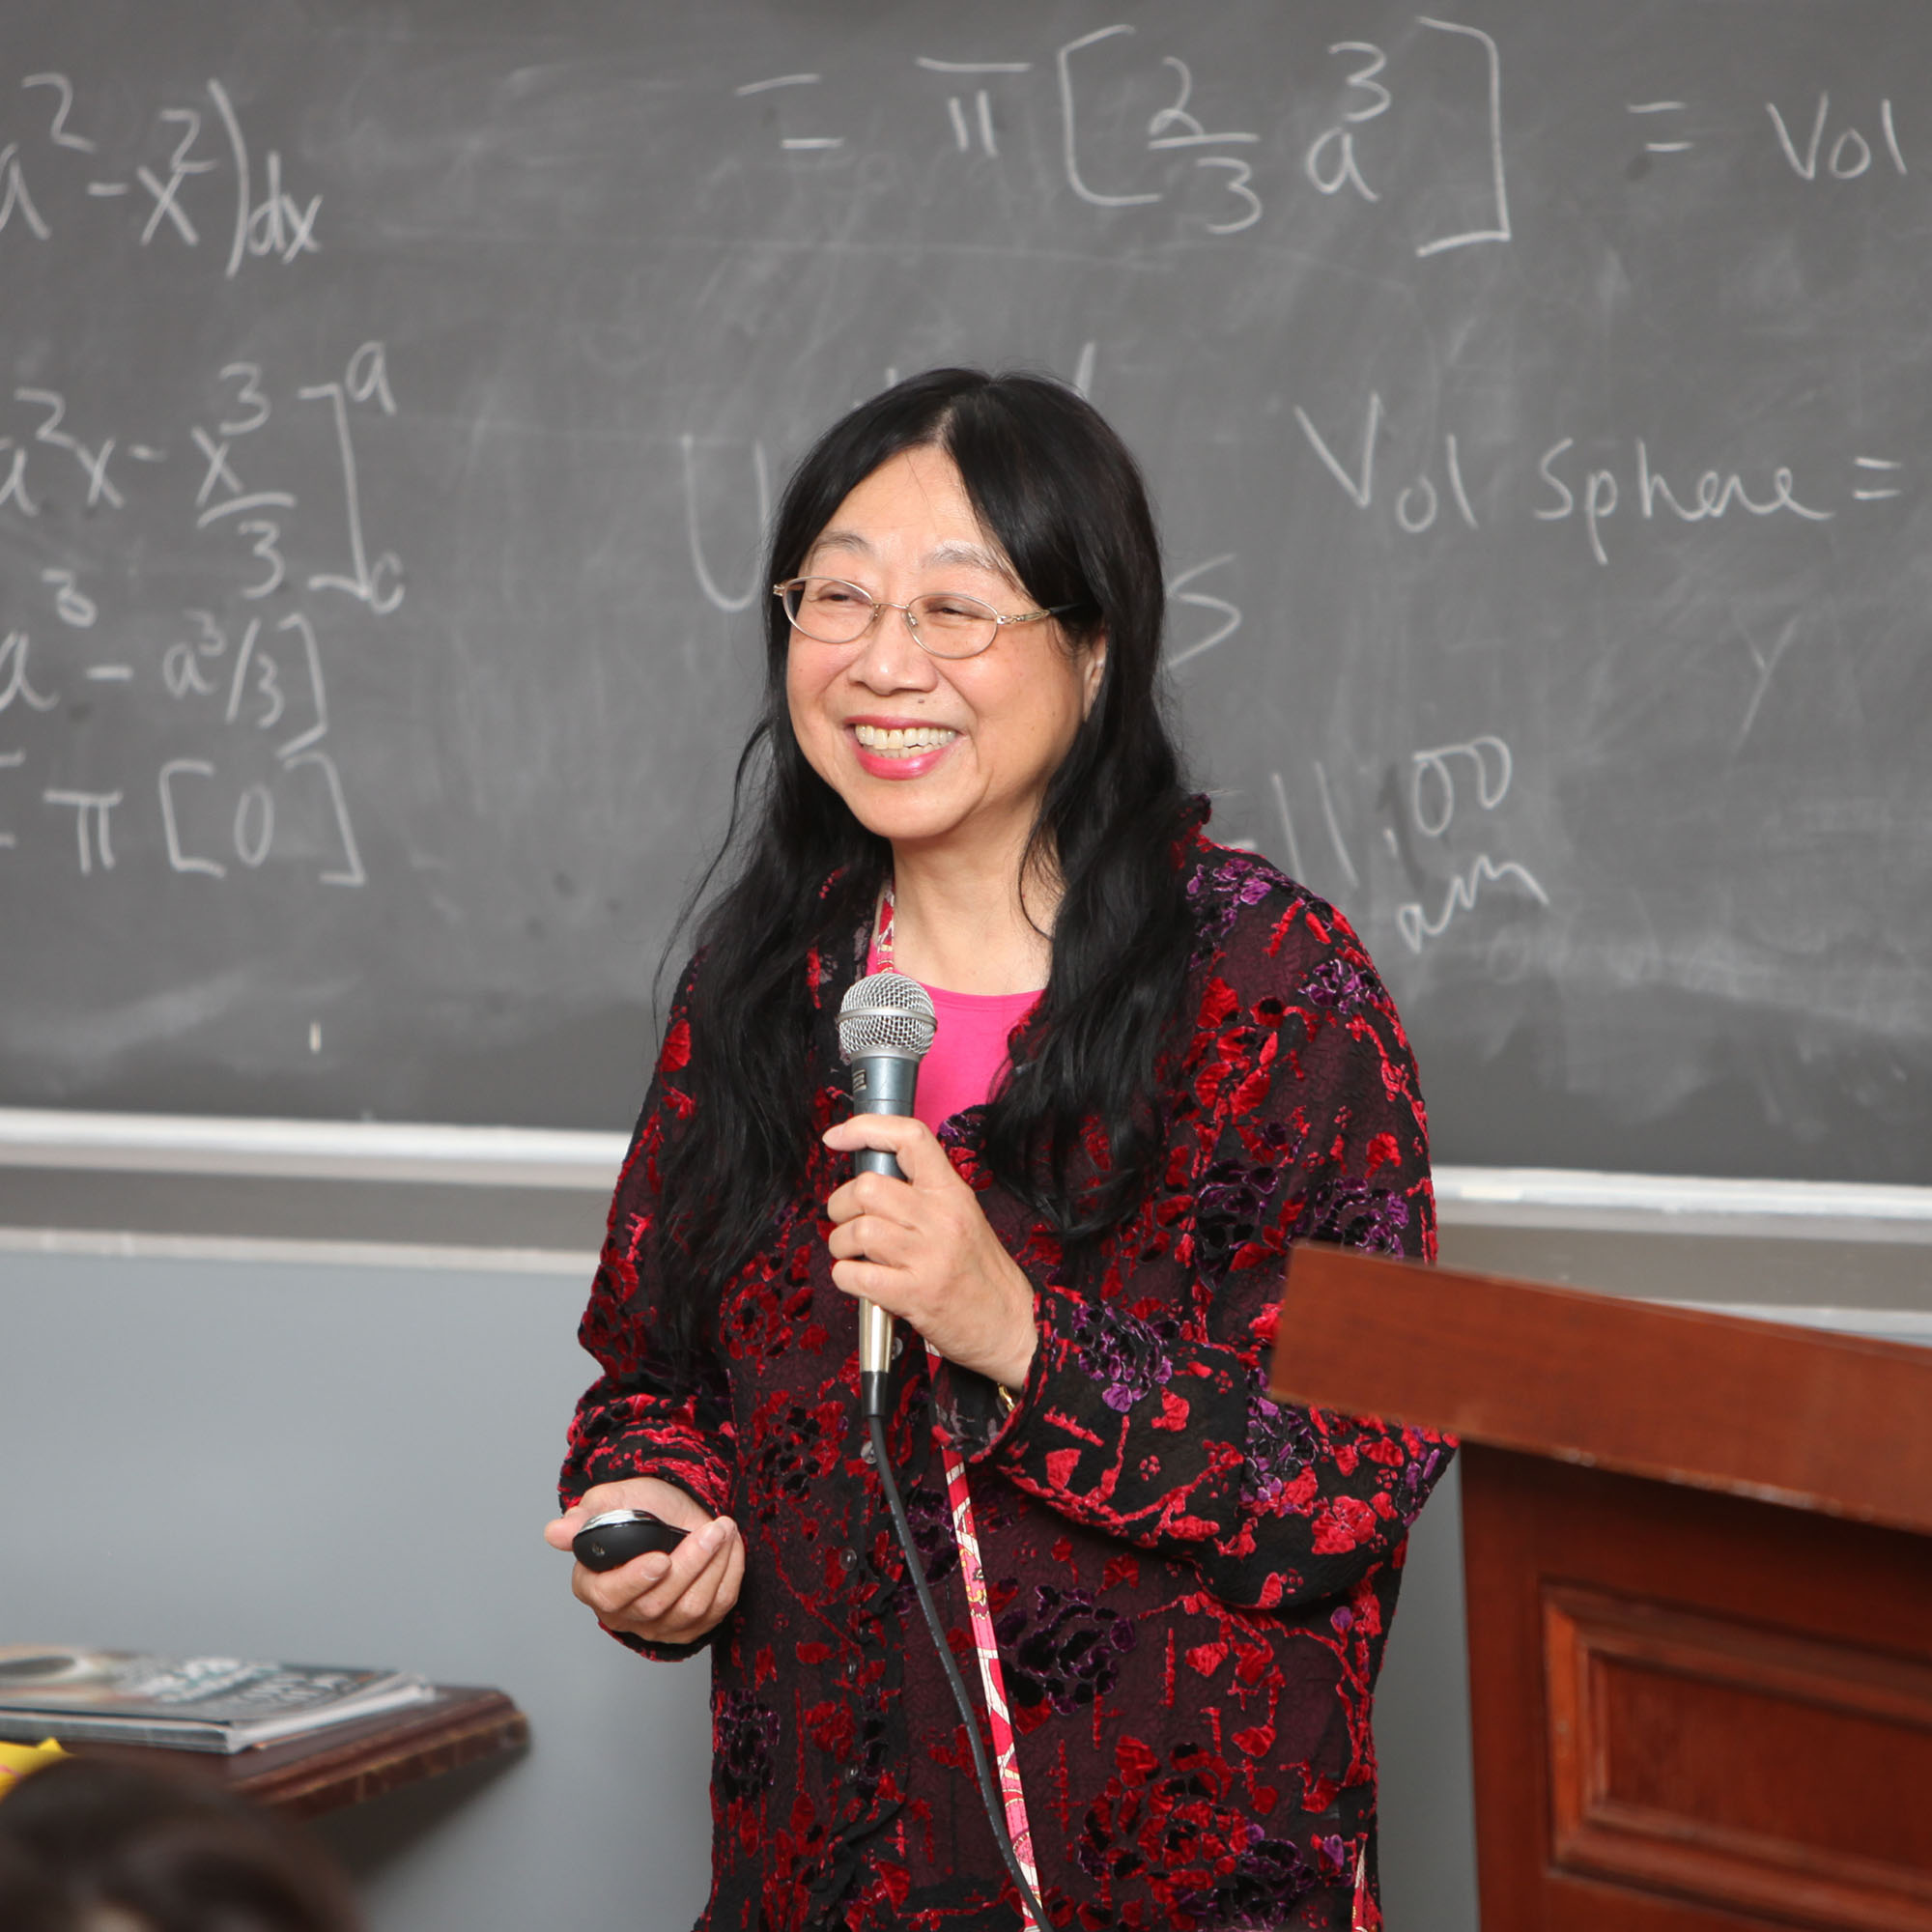 A person with long black hair wearing a red and black patterned jacket stands in front of a blackboard with equations written on it, holding a microphone and smiling.